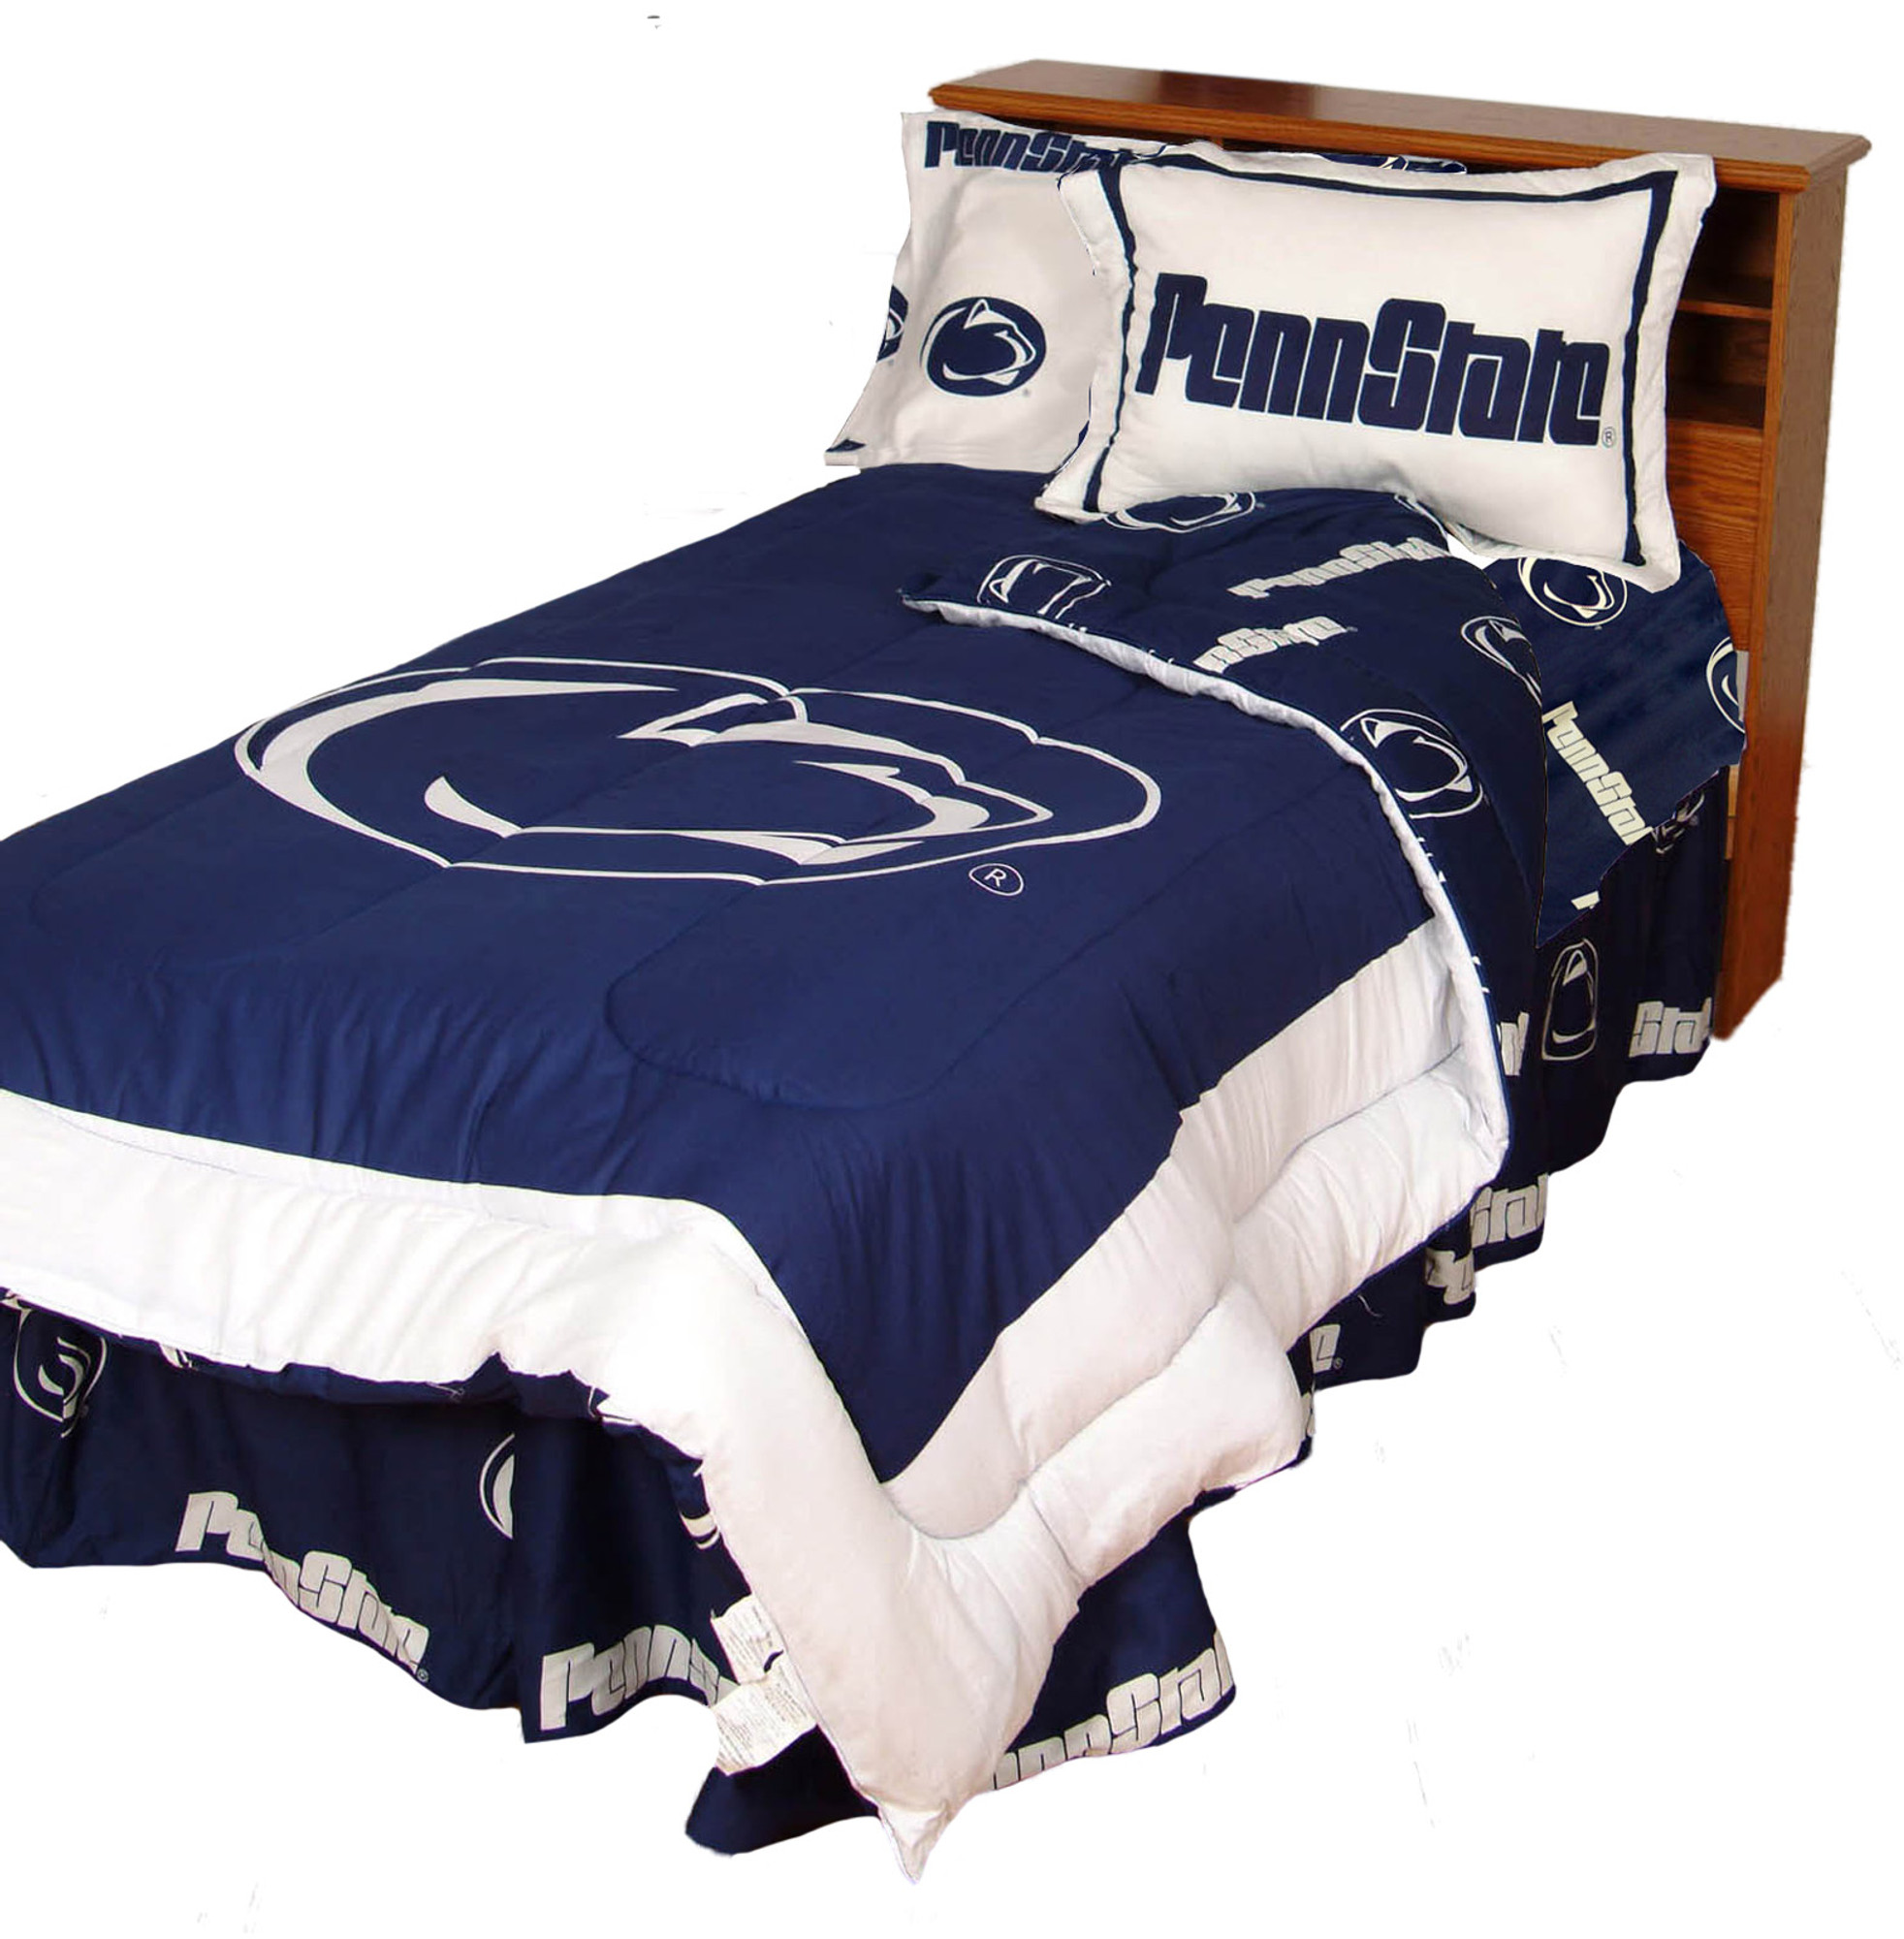 Penn State Nittany Lions Reversible Comforter Set Twin